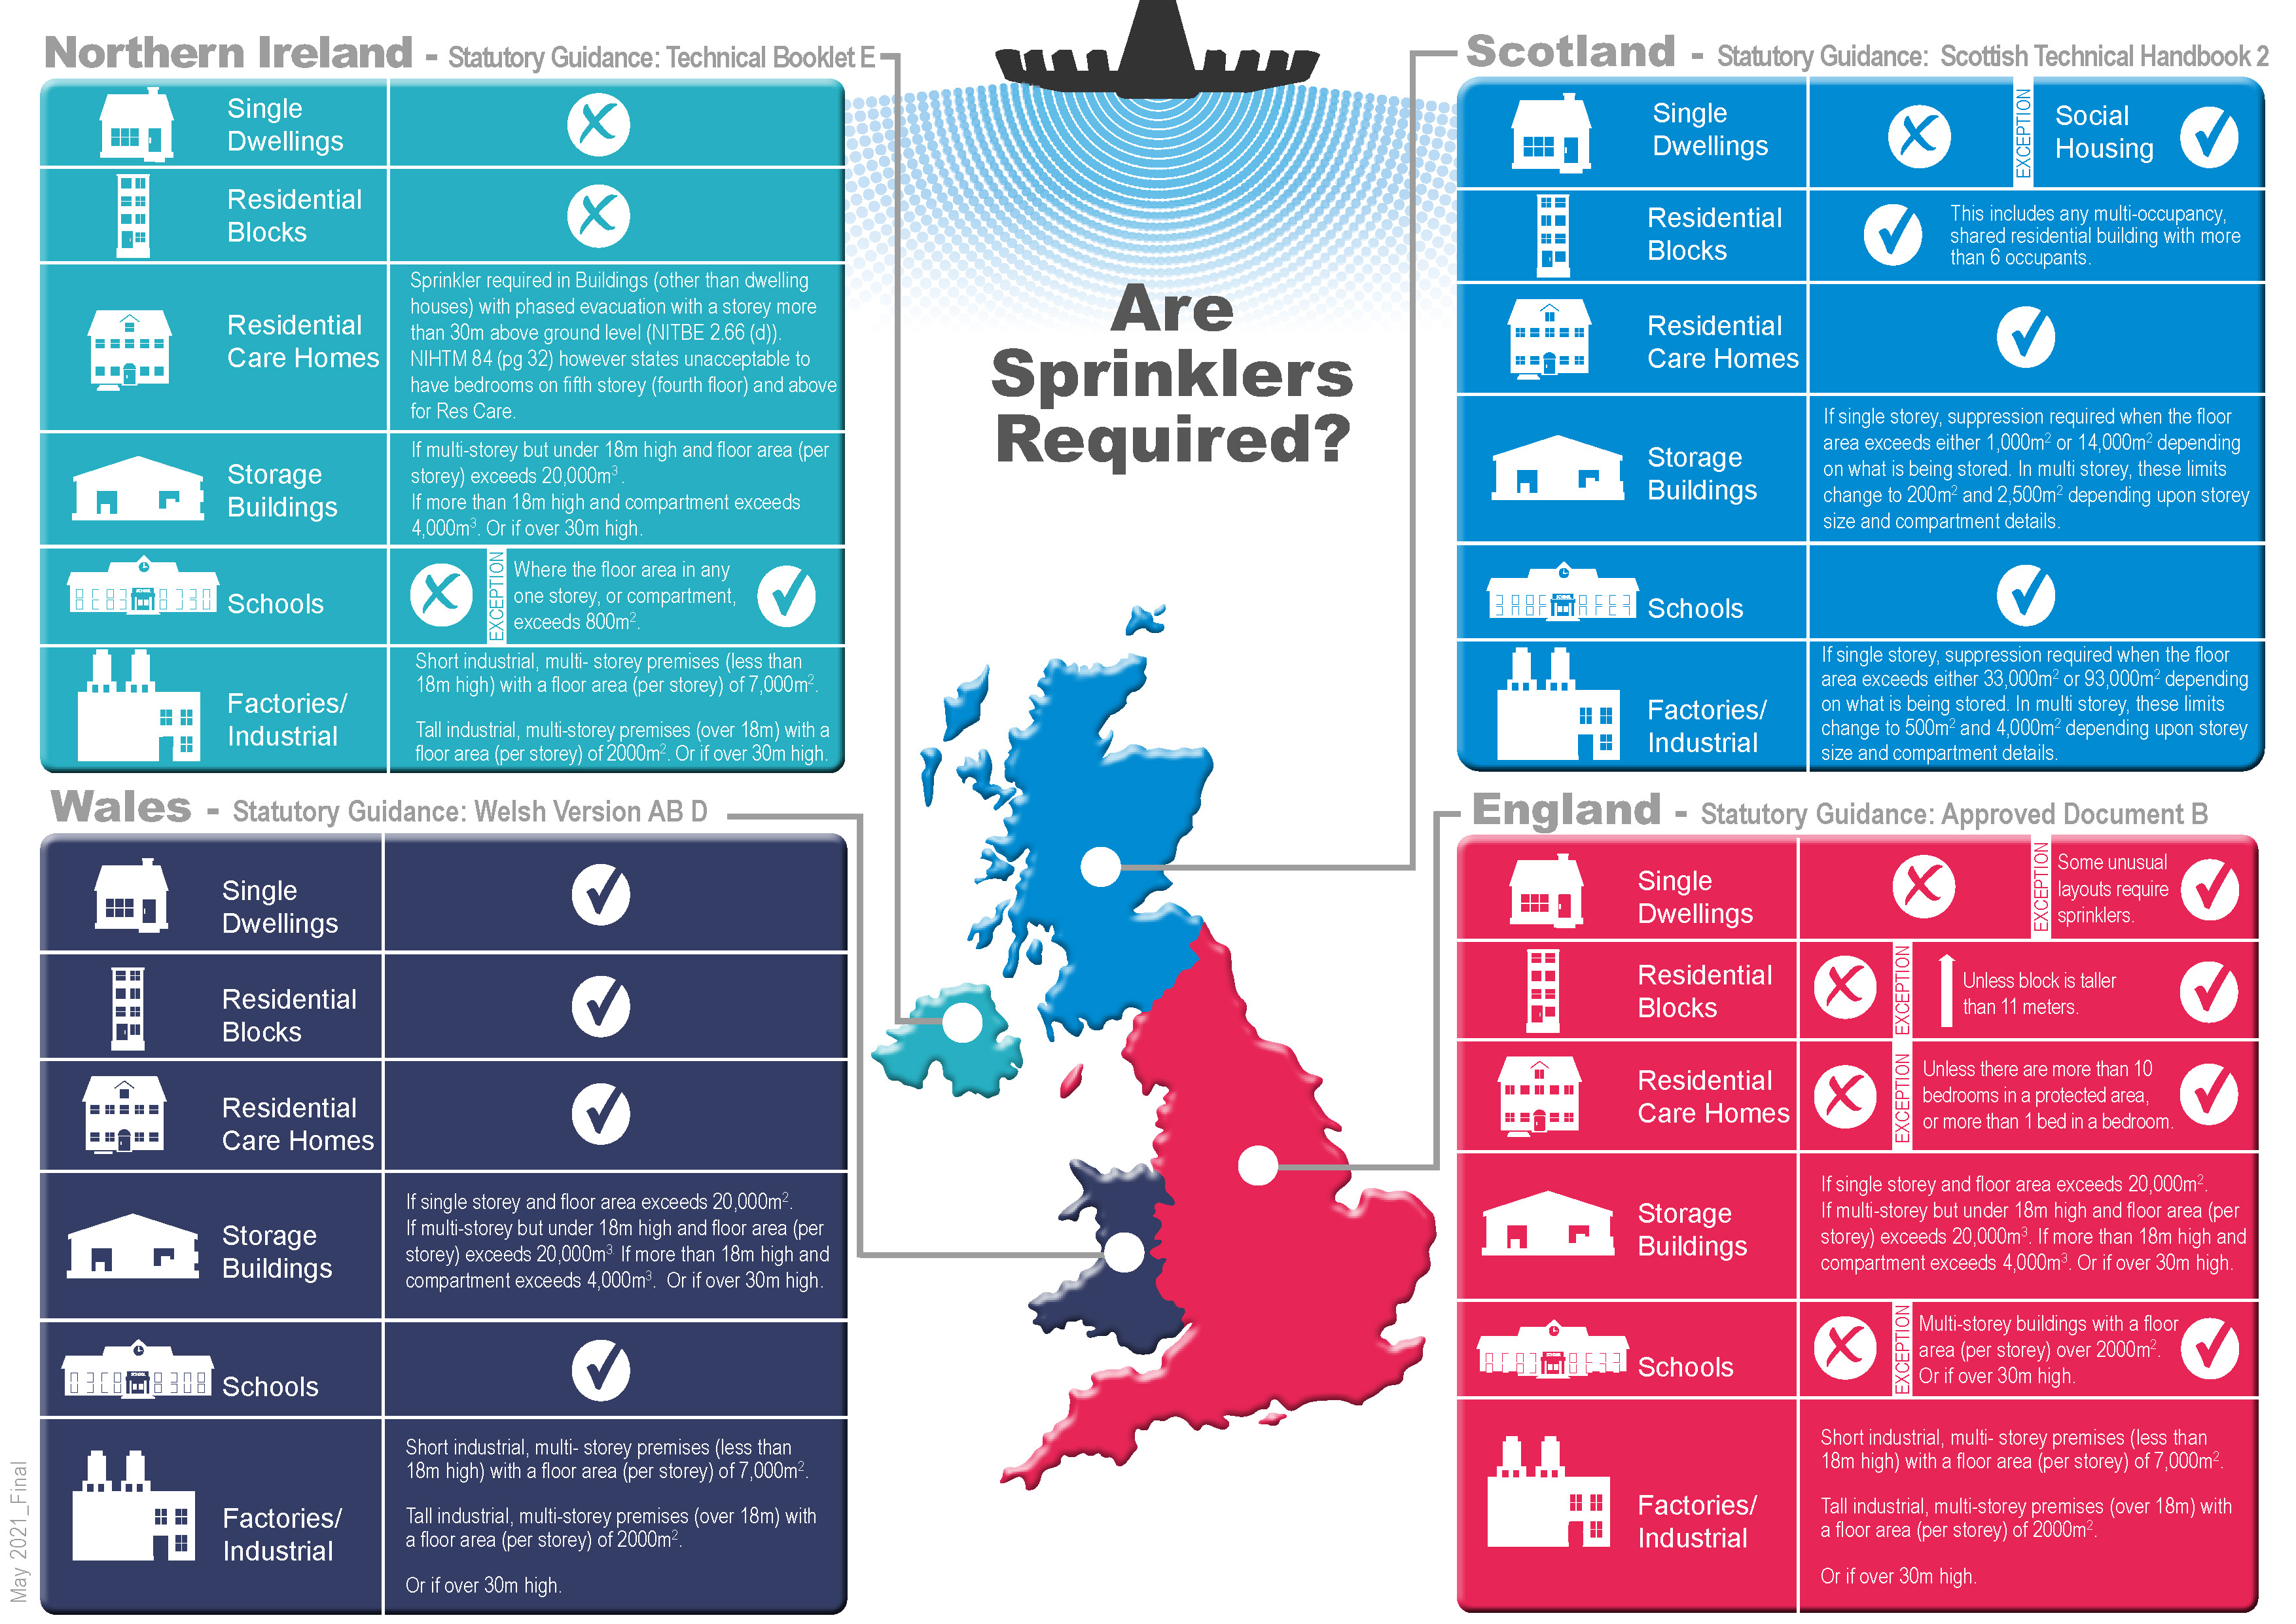 The infographic below explains where sprinklers are required by law in England, Wales, Scotland and Northern Ireland. The pdf document of the same name contains all the information included in this image.